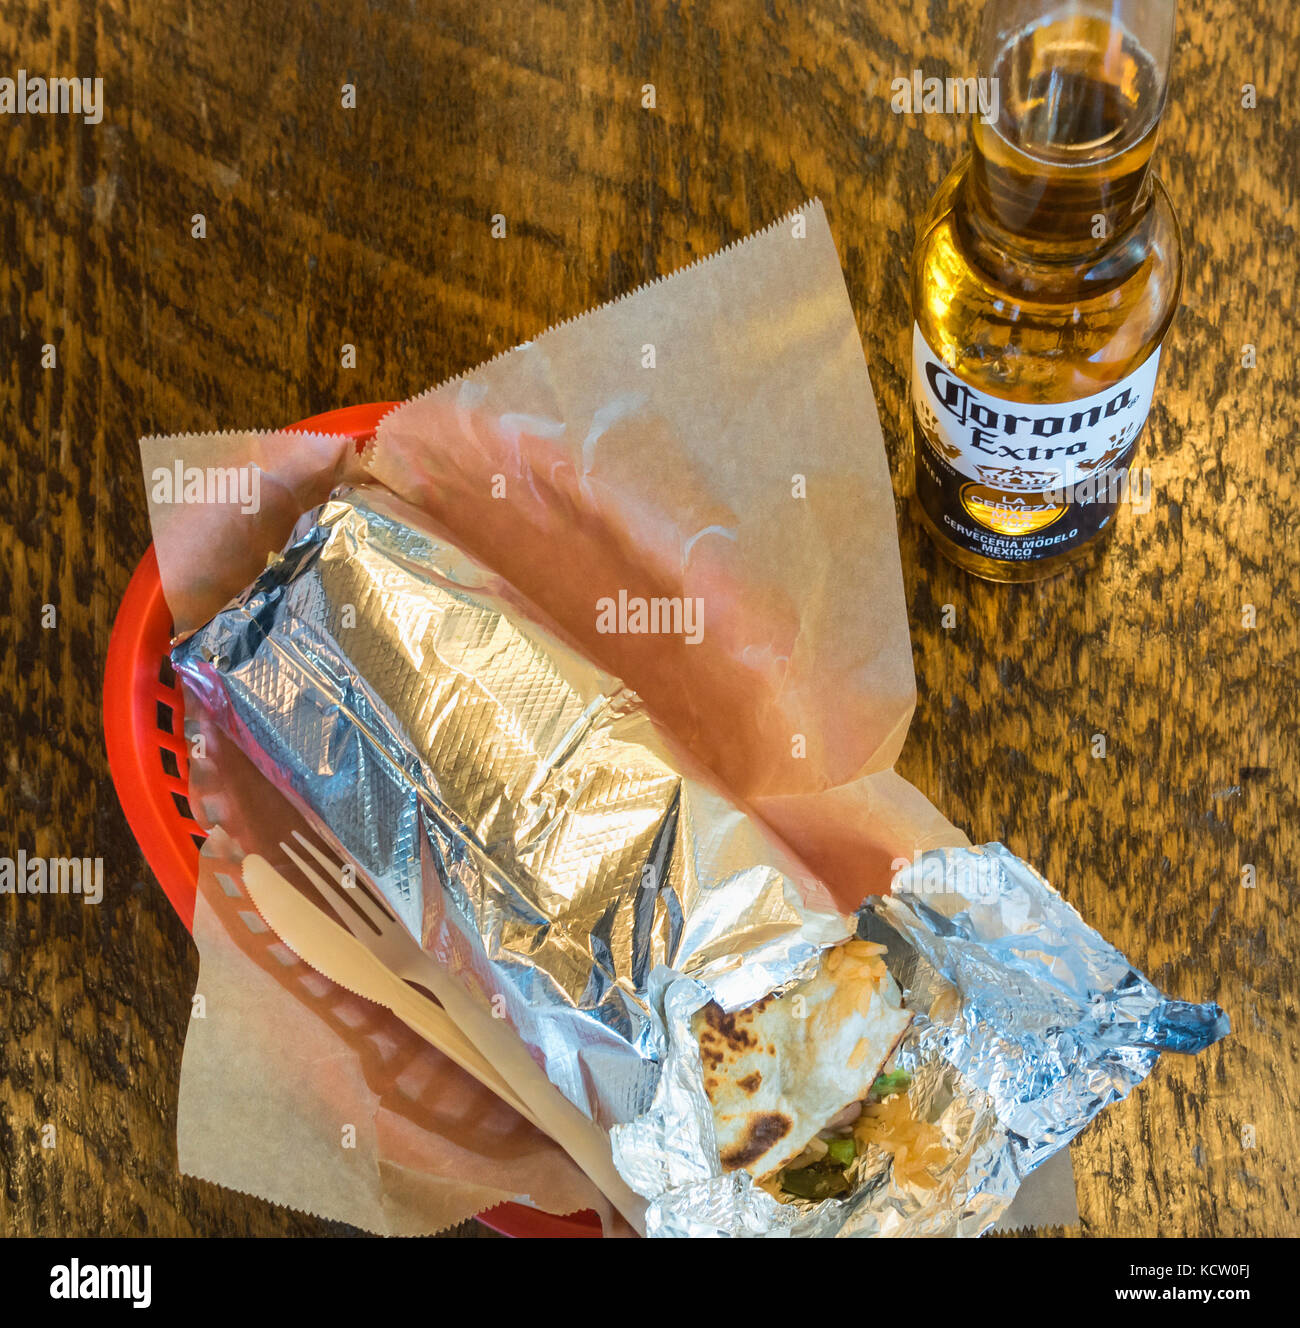 A large takeout quesadilla wrapped in tinfoil with a bottle of Corona Extra beer Stock Photo